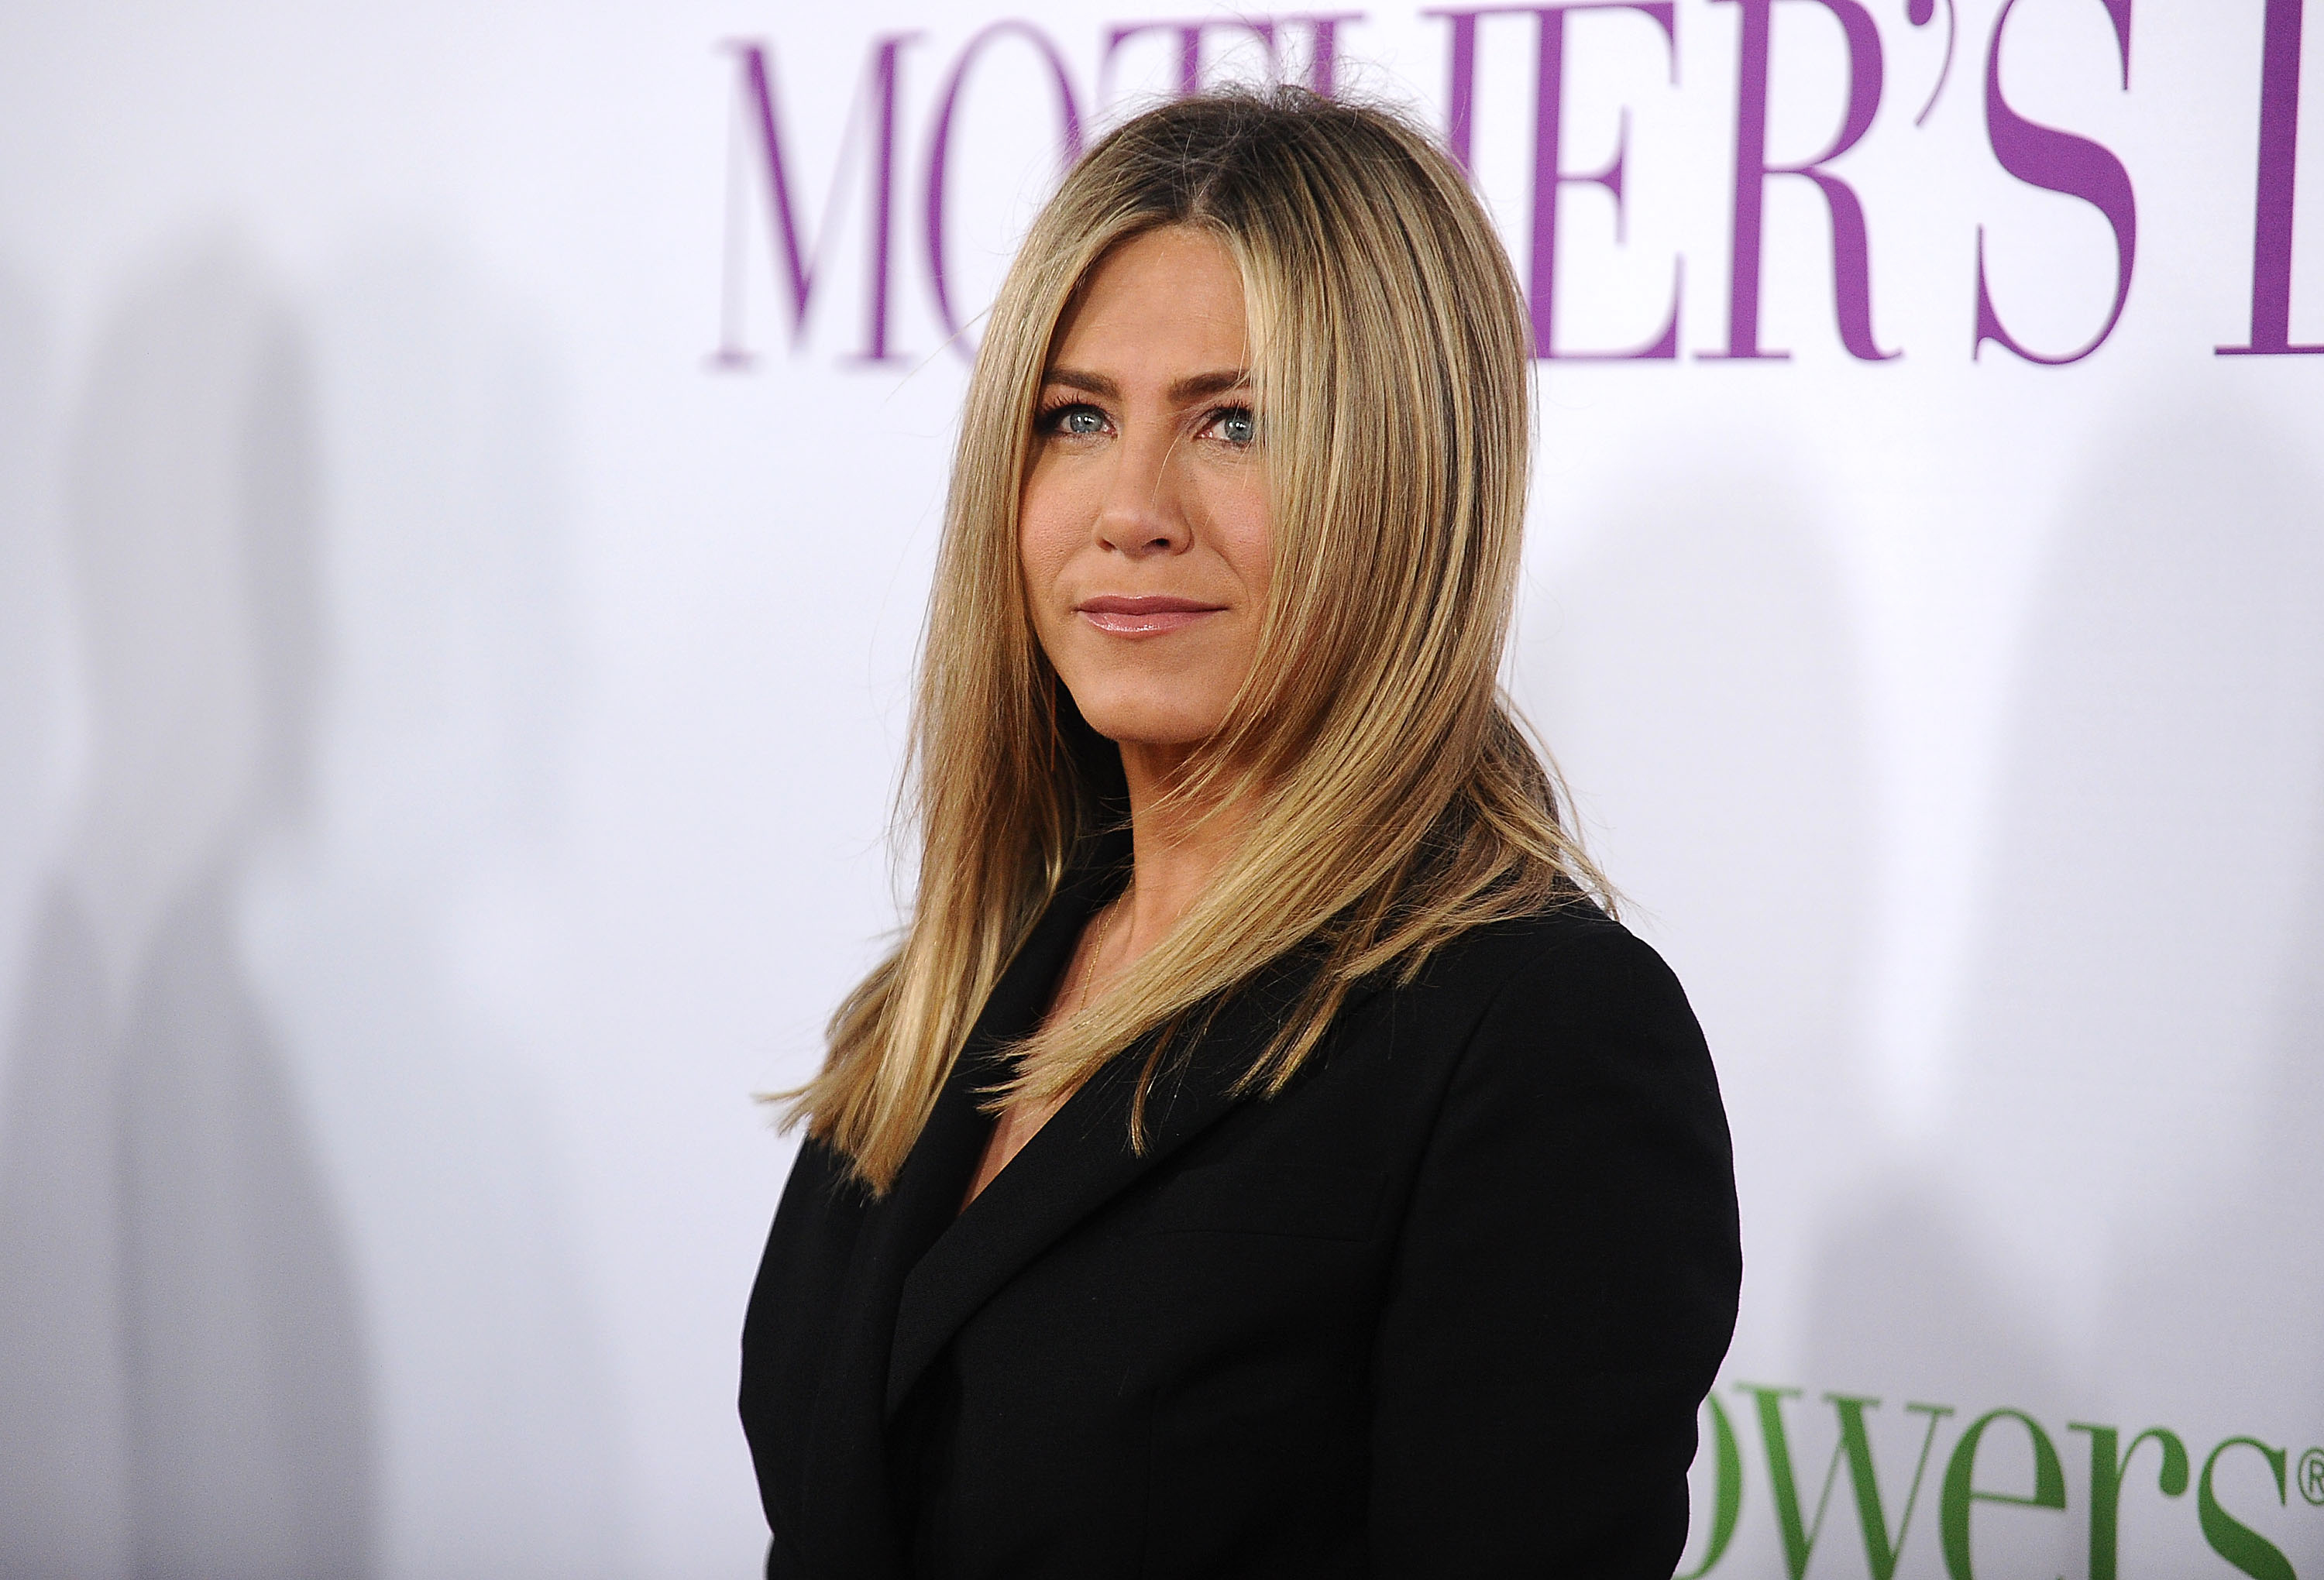 Actress Jennifer Aniston attends the premiere of "Mother's Day" at TCL Chinese Theatre IMAX on April 13, 2016 in Hollywood, California. (Jason LaVeris—FilmMagic/Getty)